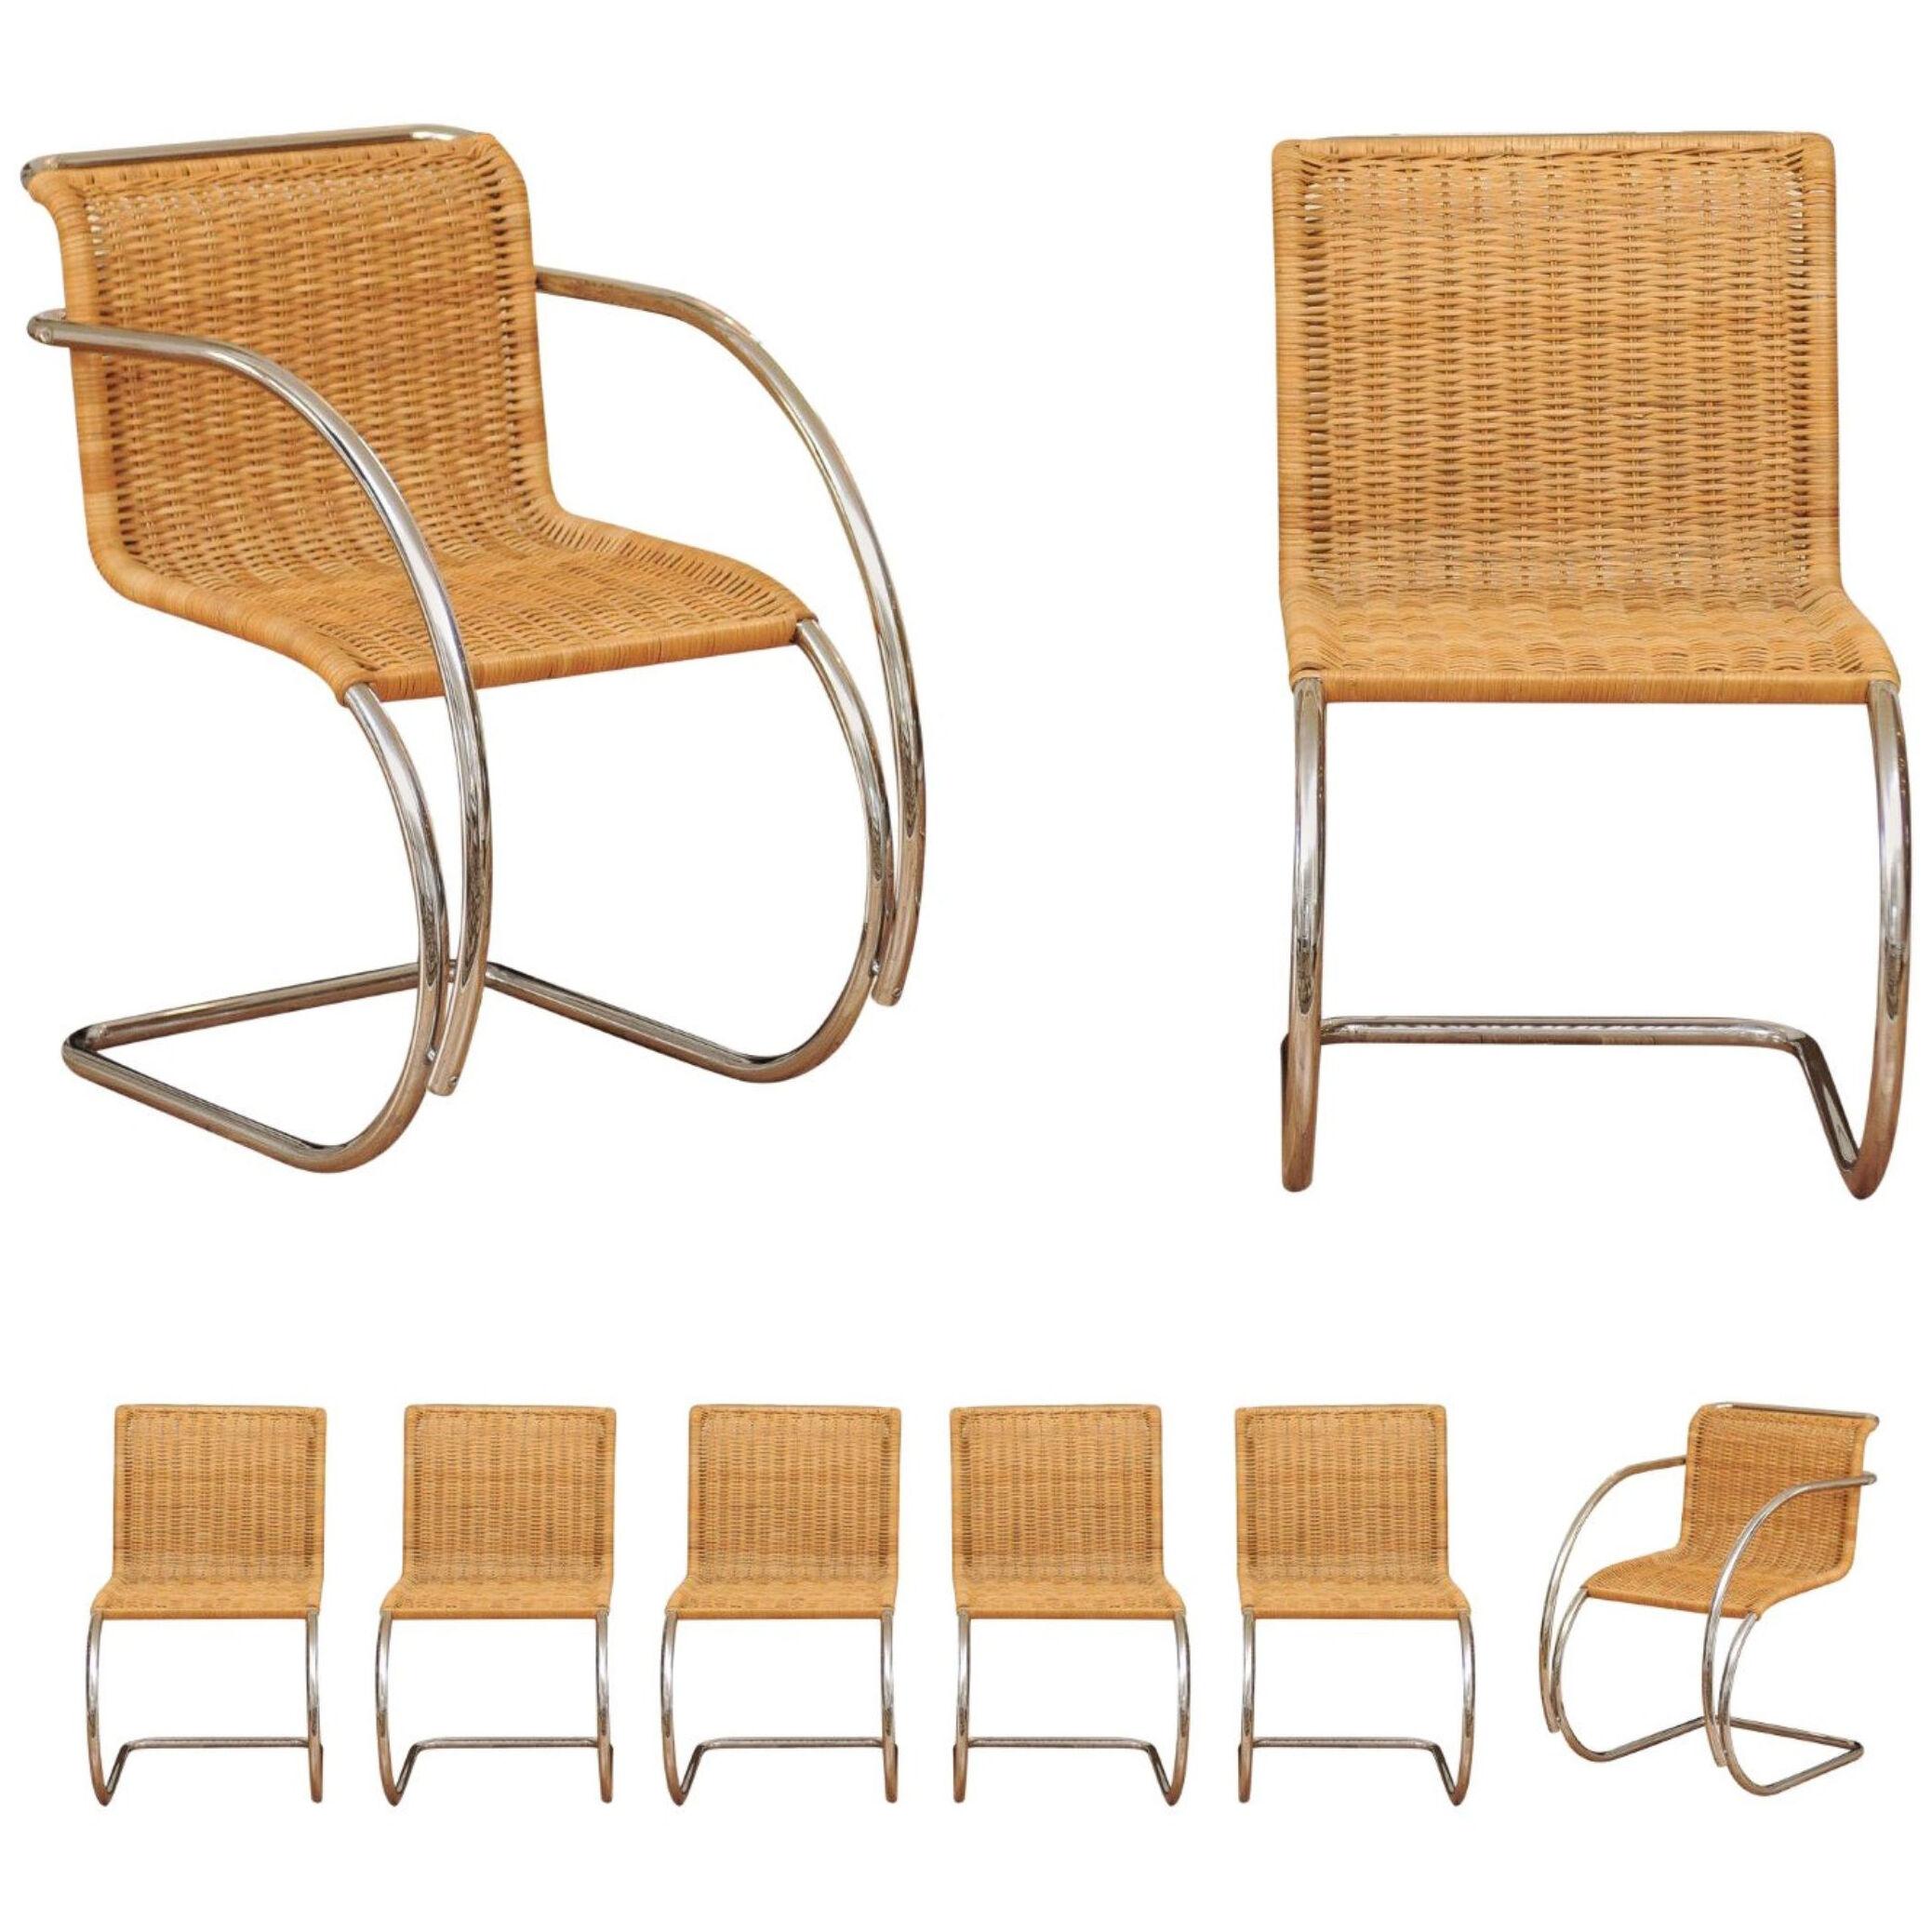 Pristine Set of Eight Italian Wicker Chairs in the Style of Mies van der Rohe